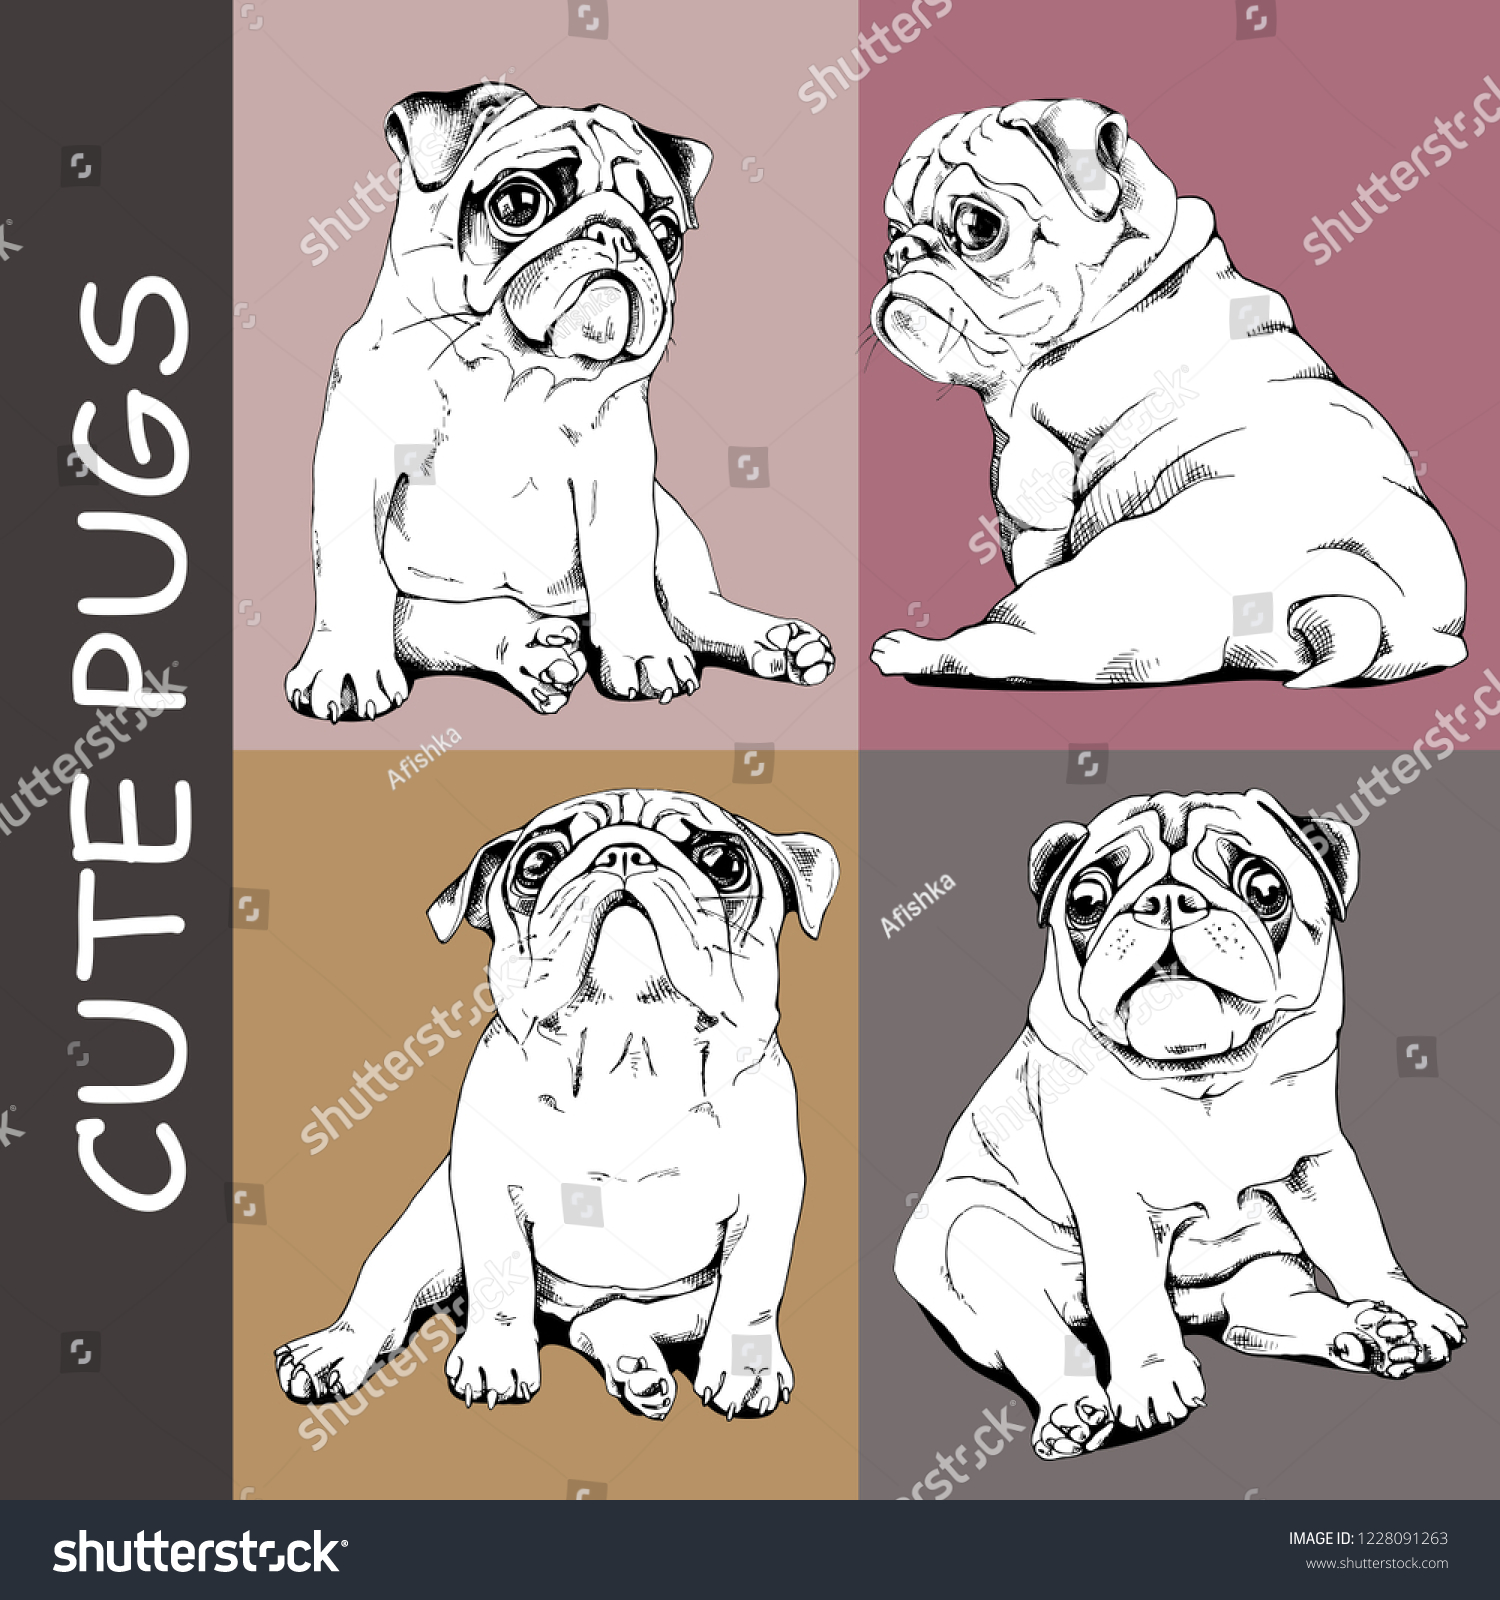 SVG of Adorable black and white Pug puppies. Сollection of a characters. Humor set, hand drawn style print. Vector illustration. svg